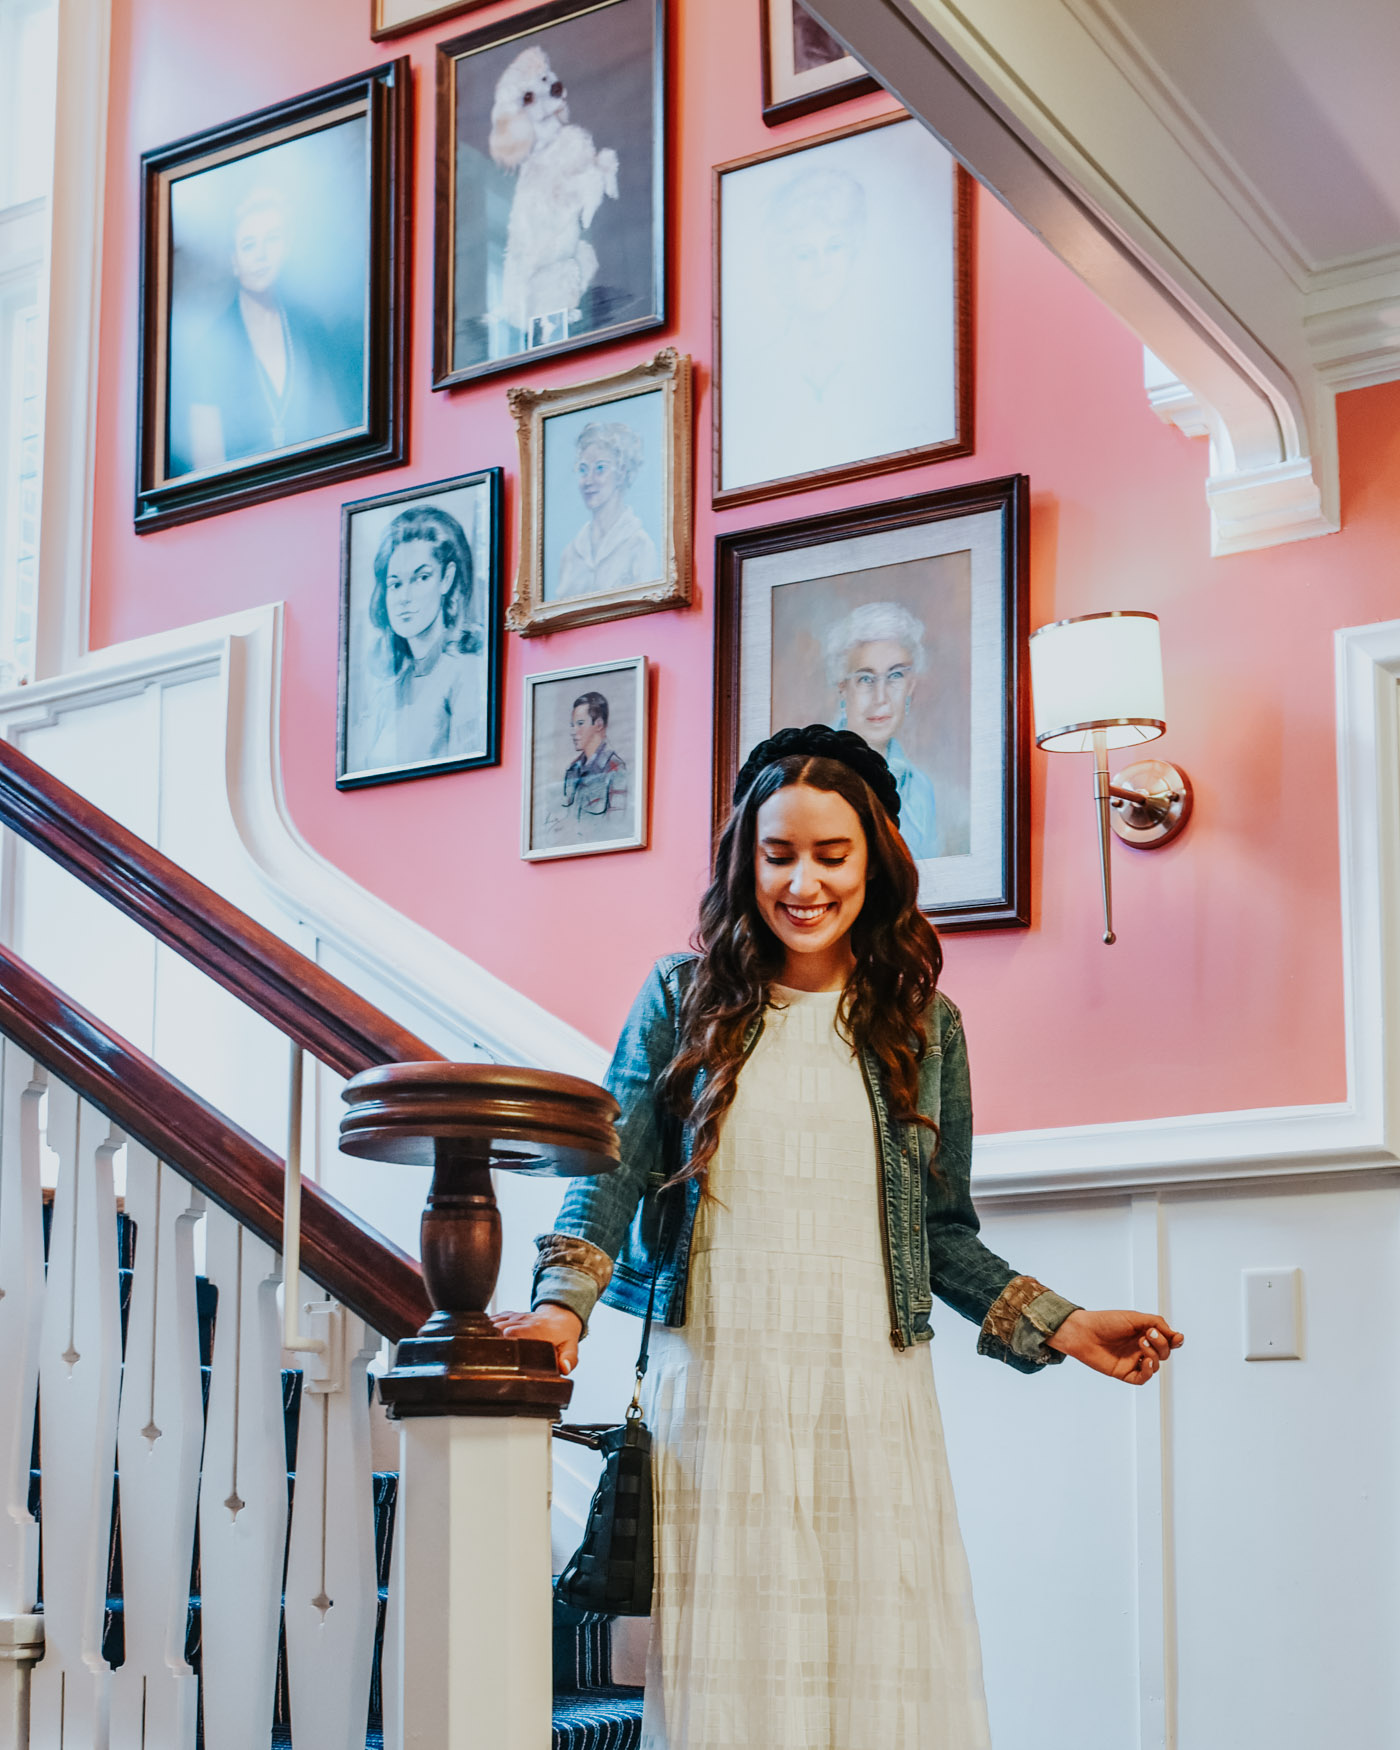 Things to do in Columbia SC by popular Memphis travel blog, Lone Star Looking Glass: image of a woman standing on a staircase at the Graduate hotel in Columbia SC.